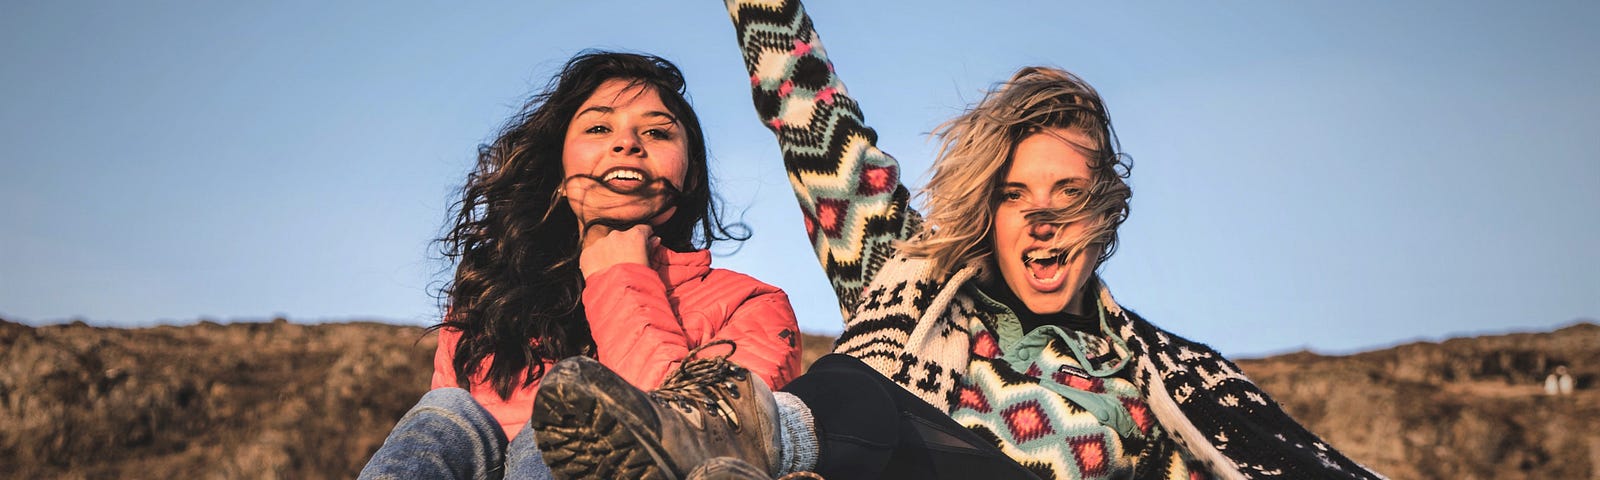 Two girls sitting on top of vehicle with wind blowing in their hair